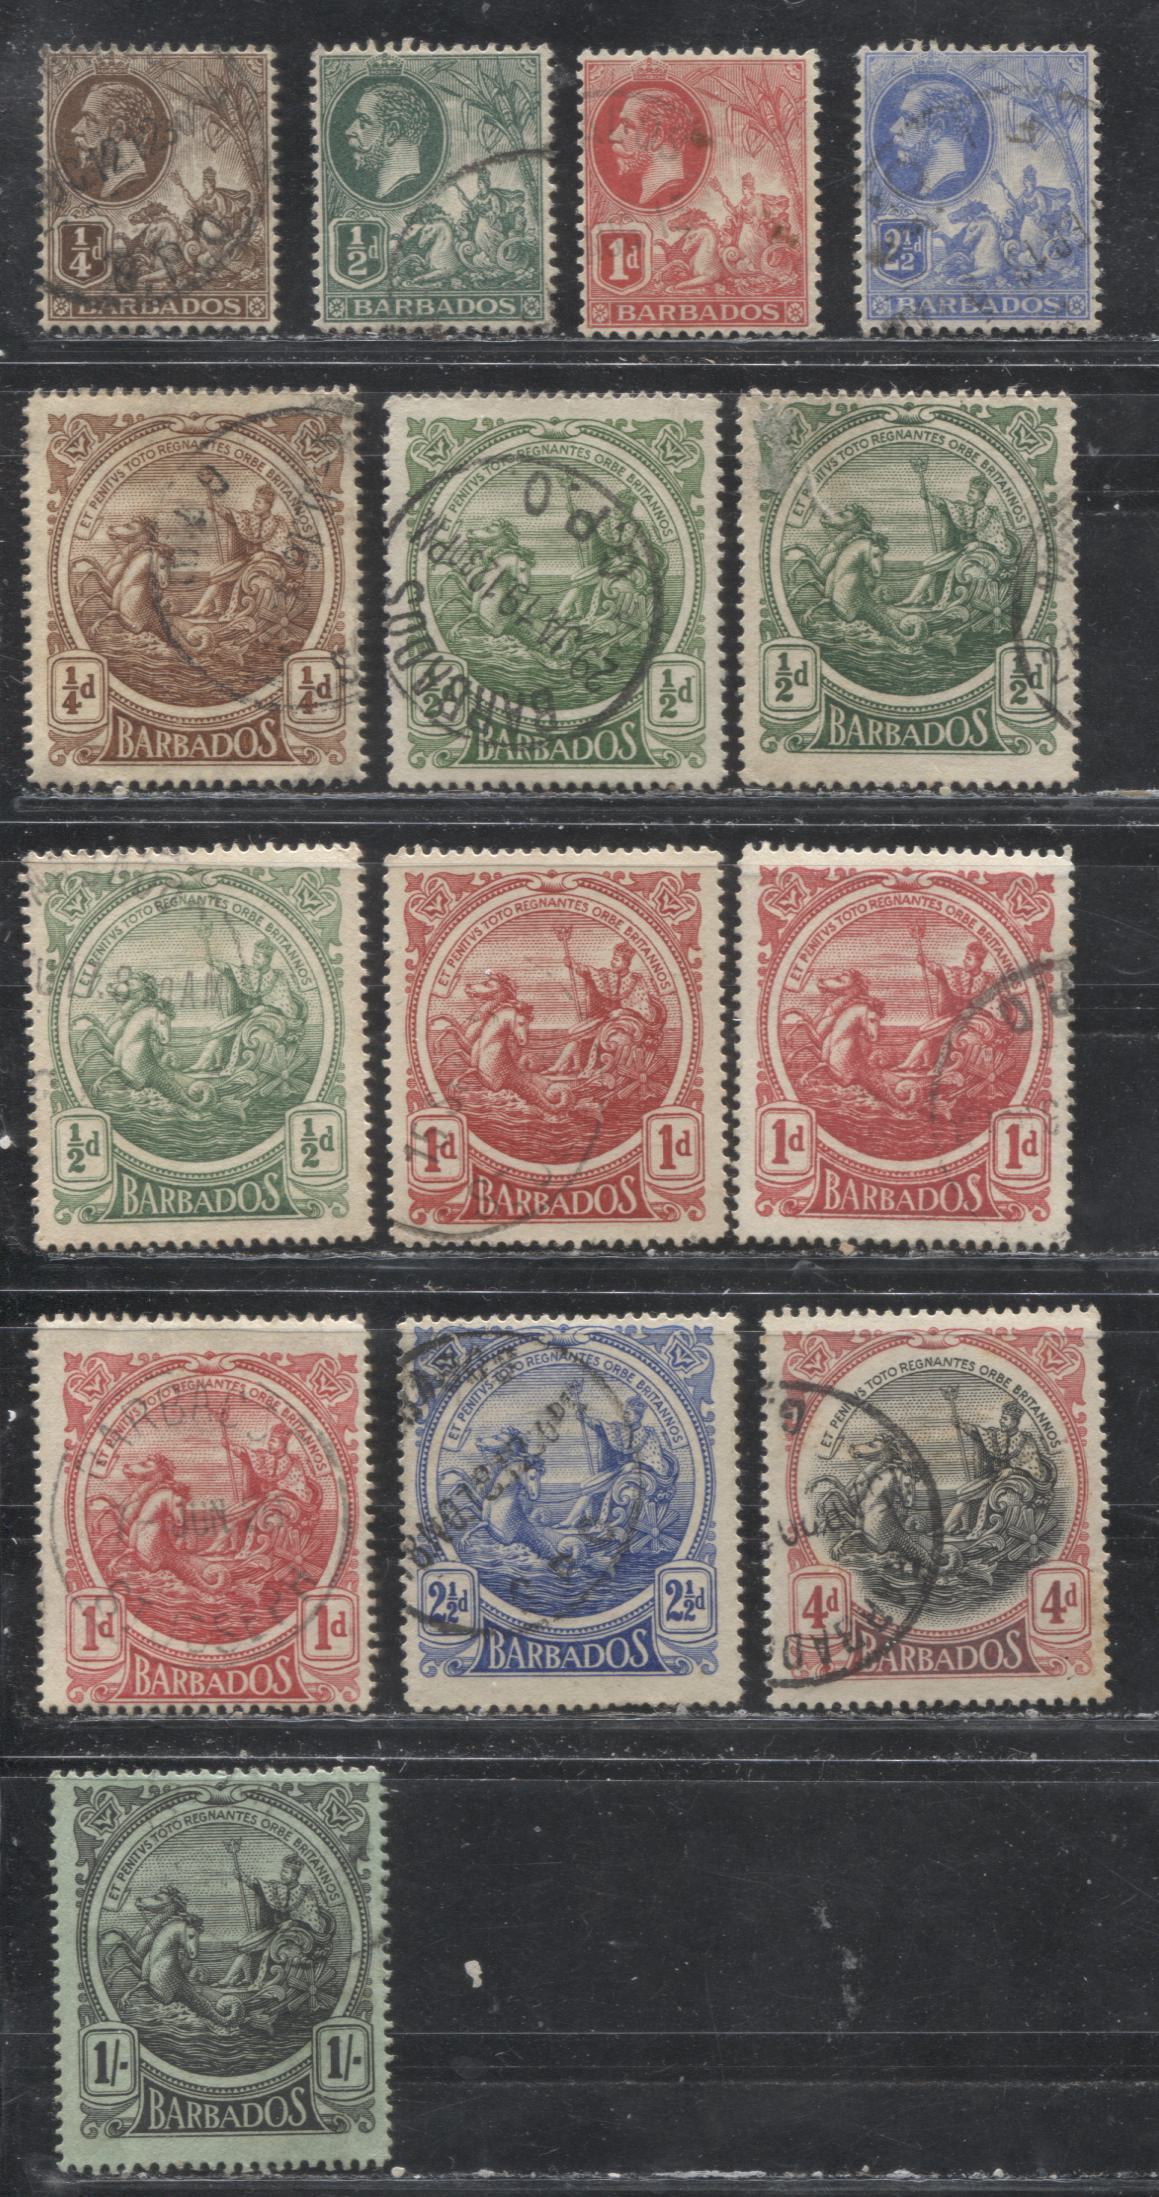 Lot 246 Barbados SG#170/189 1/4d - 1/- Brown - Black on Green Badge of the Colony, 1912-1919 Engraved and Keyplate Colonial Badge Issues, Fourteen Fine and VF Used Examples